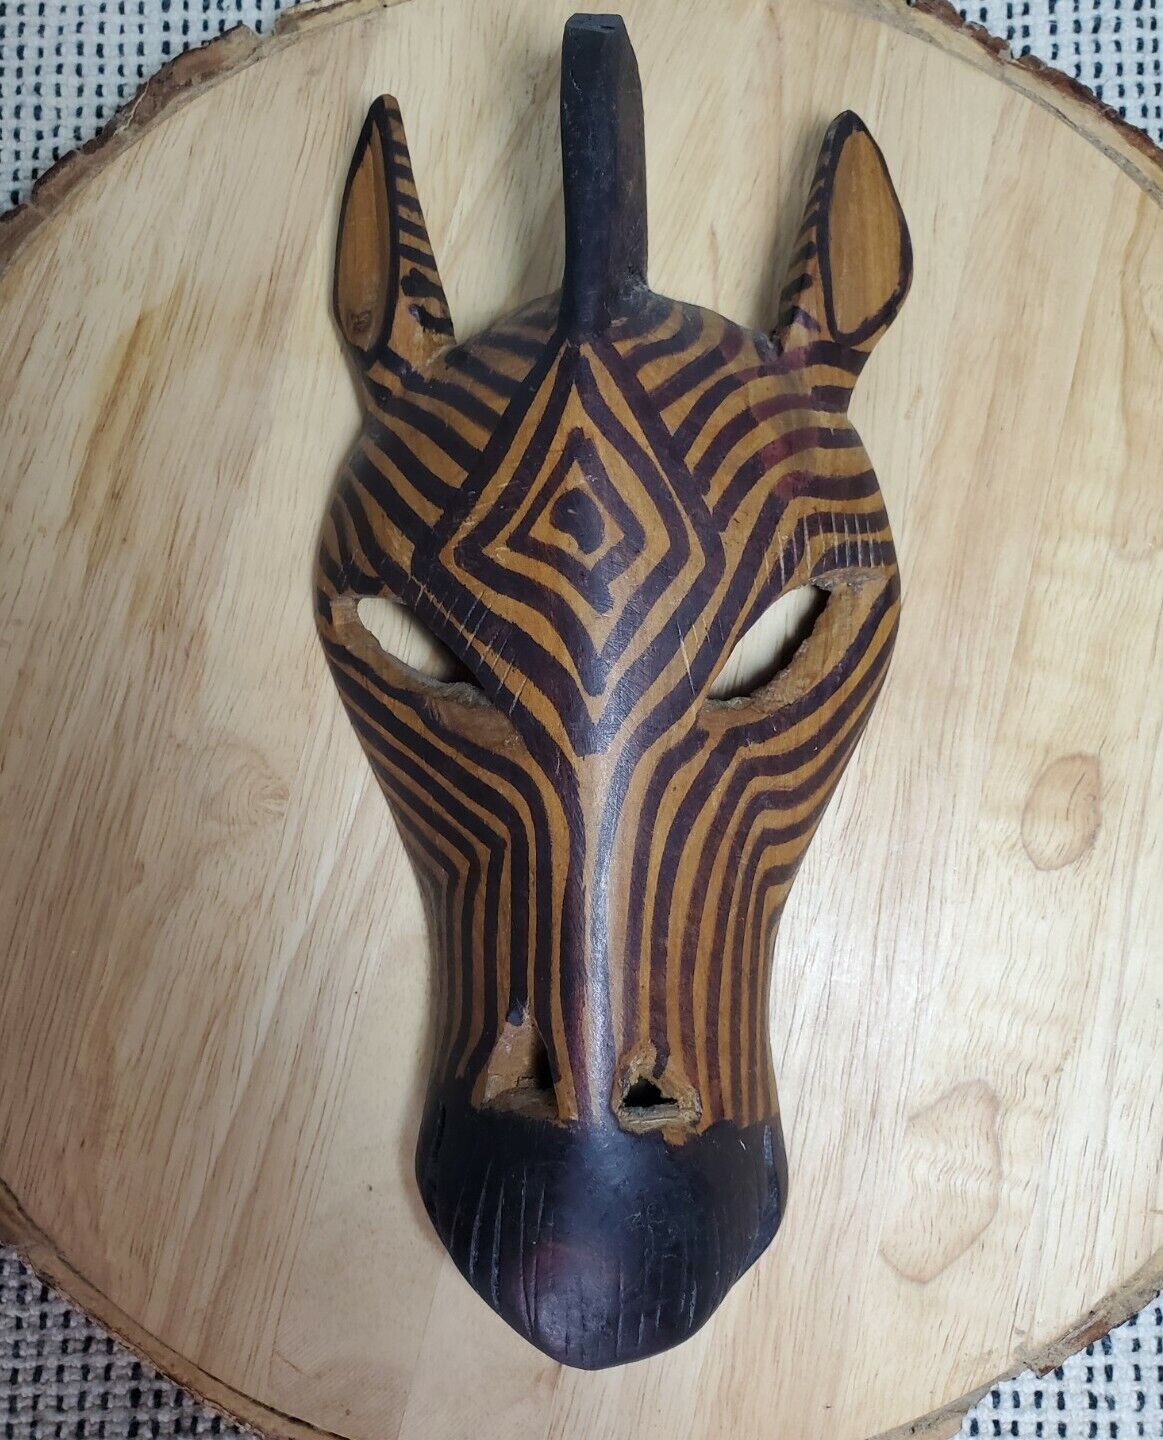 Authentic African Kenya Hand Carved/stained Zebra Mask Wall Decor  10"x4.5"